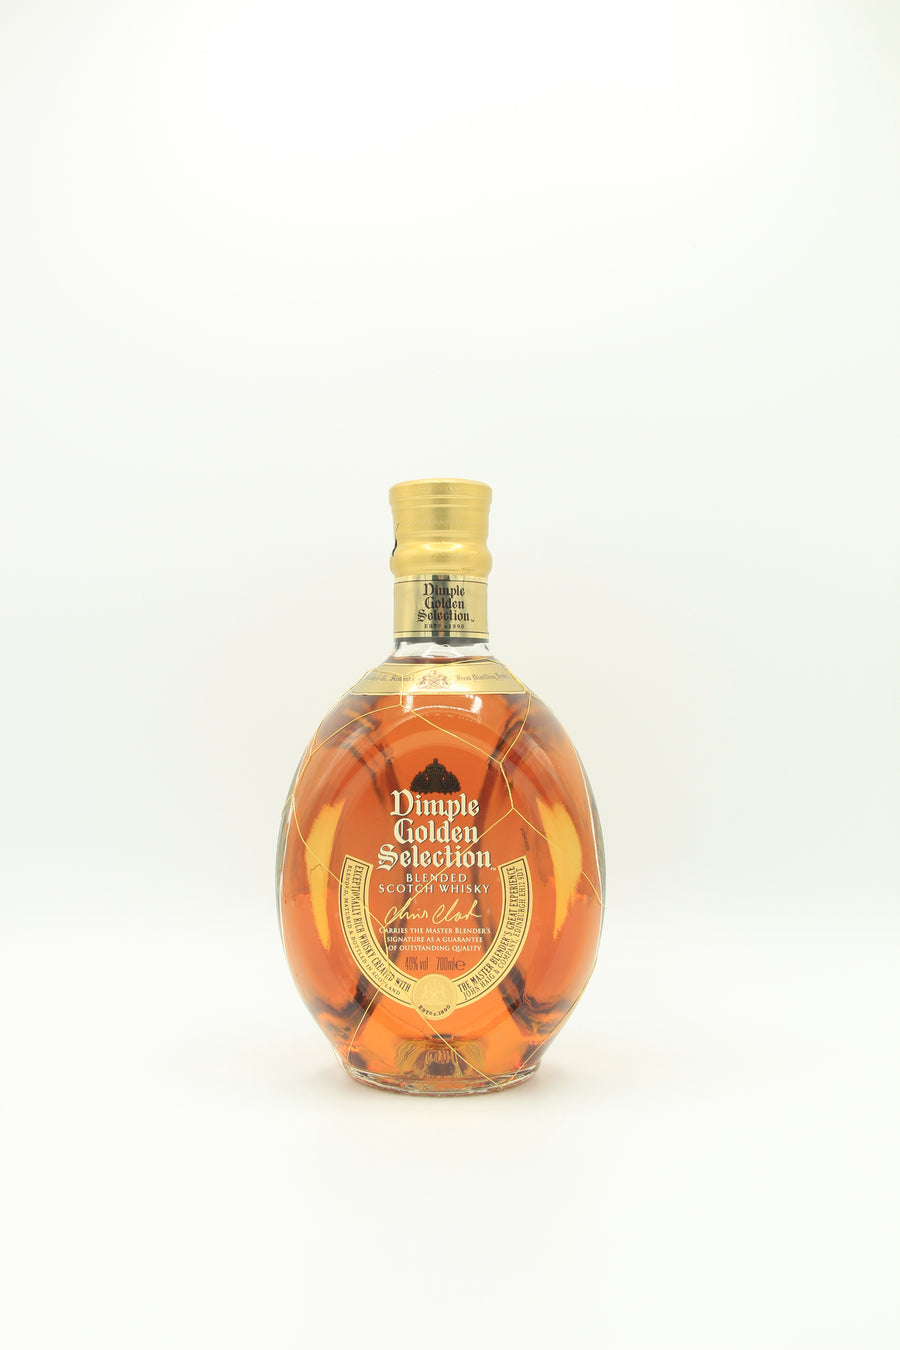 Dimple Gold Selection Blended Whisky, Scotland